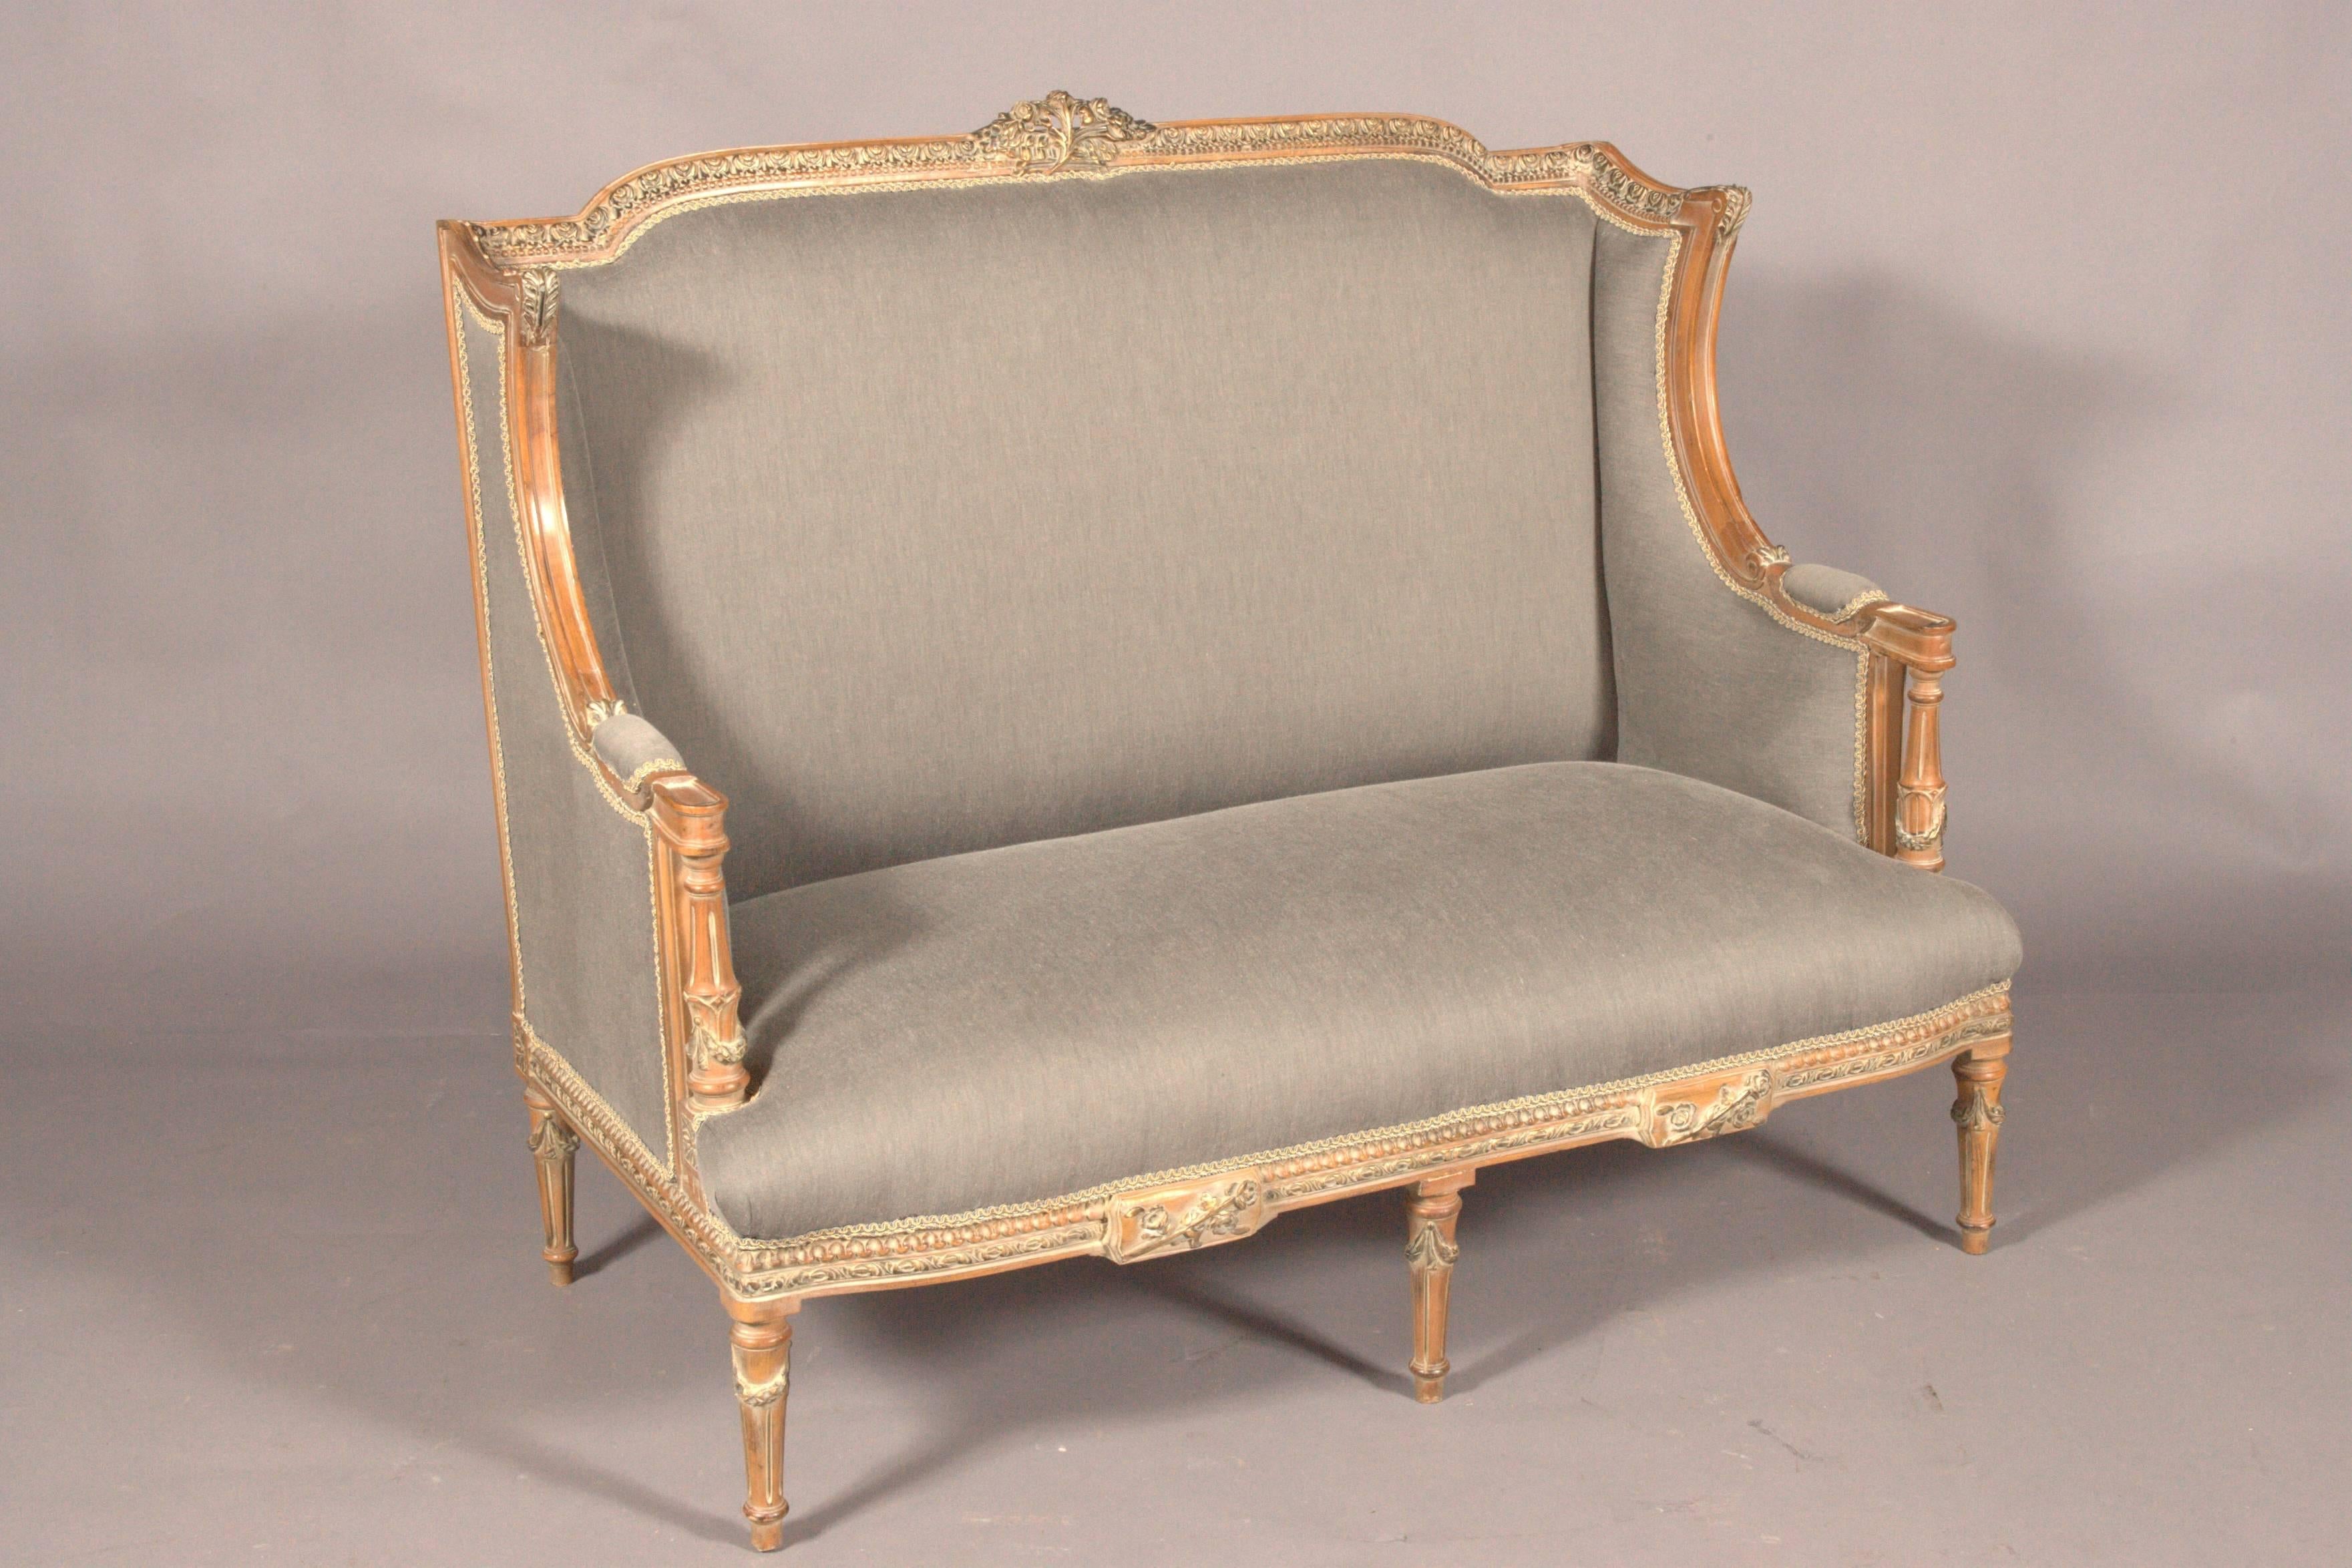 20th Century Classic Seating Set of Three Pieces in the Louis XVI Style (Französisch)